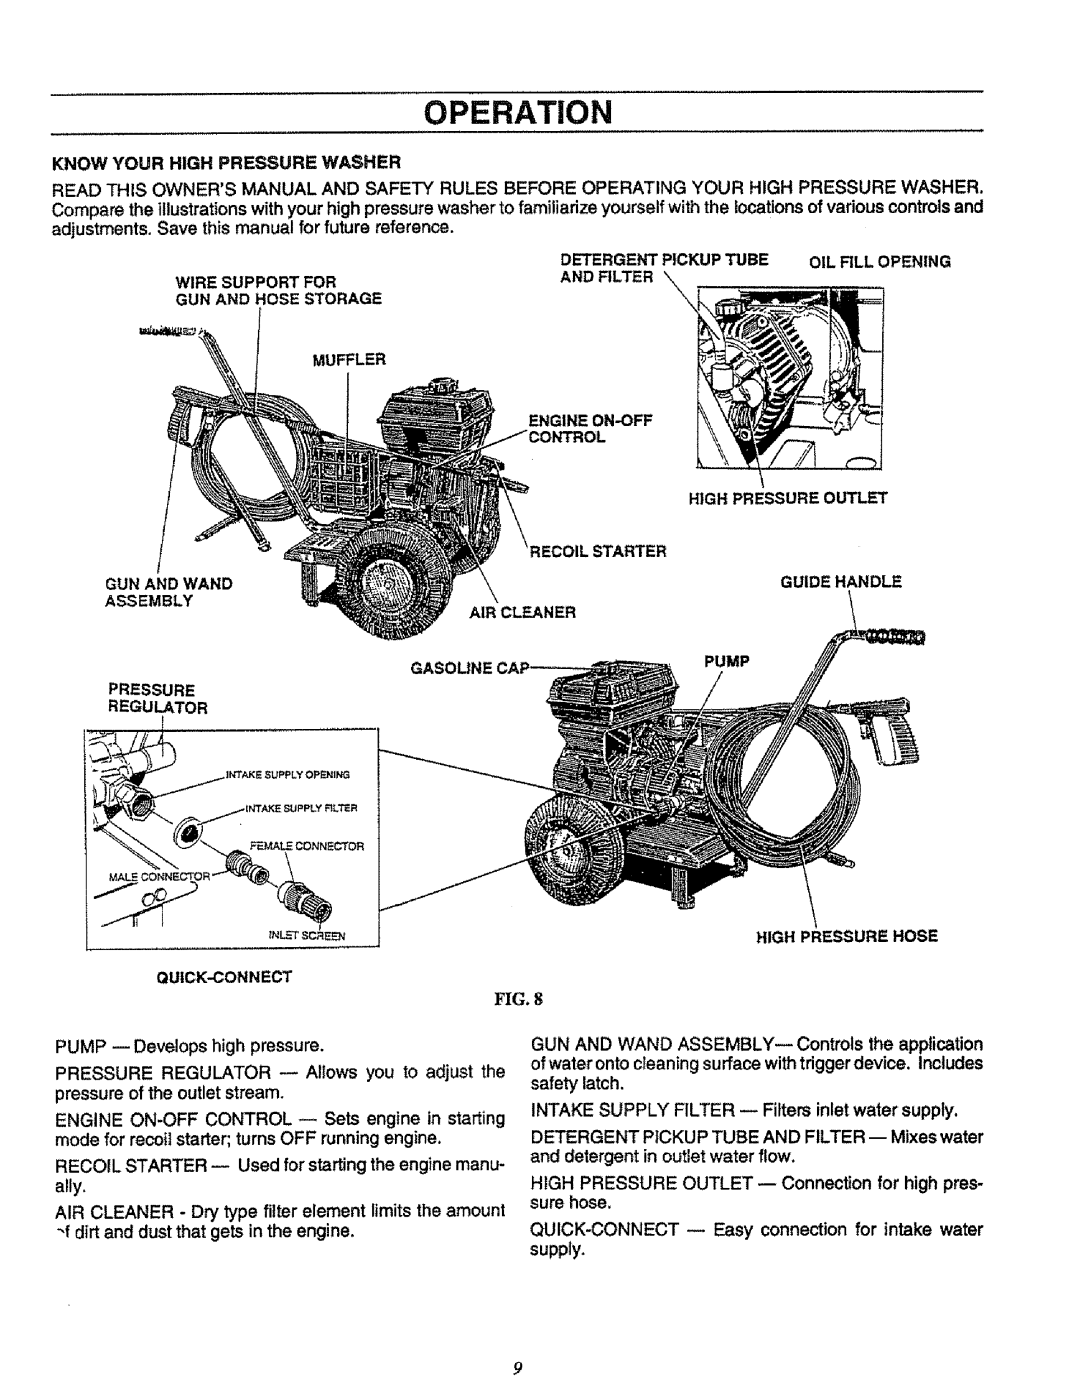 Craftsman 580.751651 owner manual Operation, Know Your High Pressure Washer, Starter, Fig 